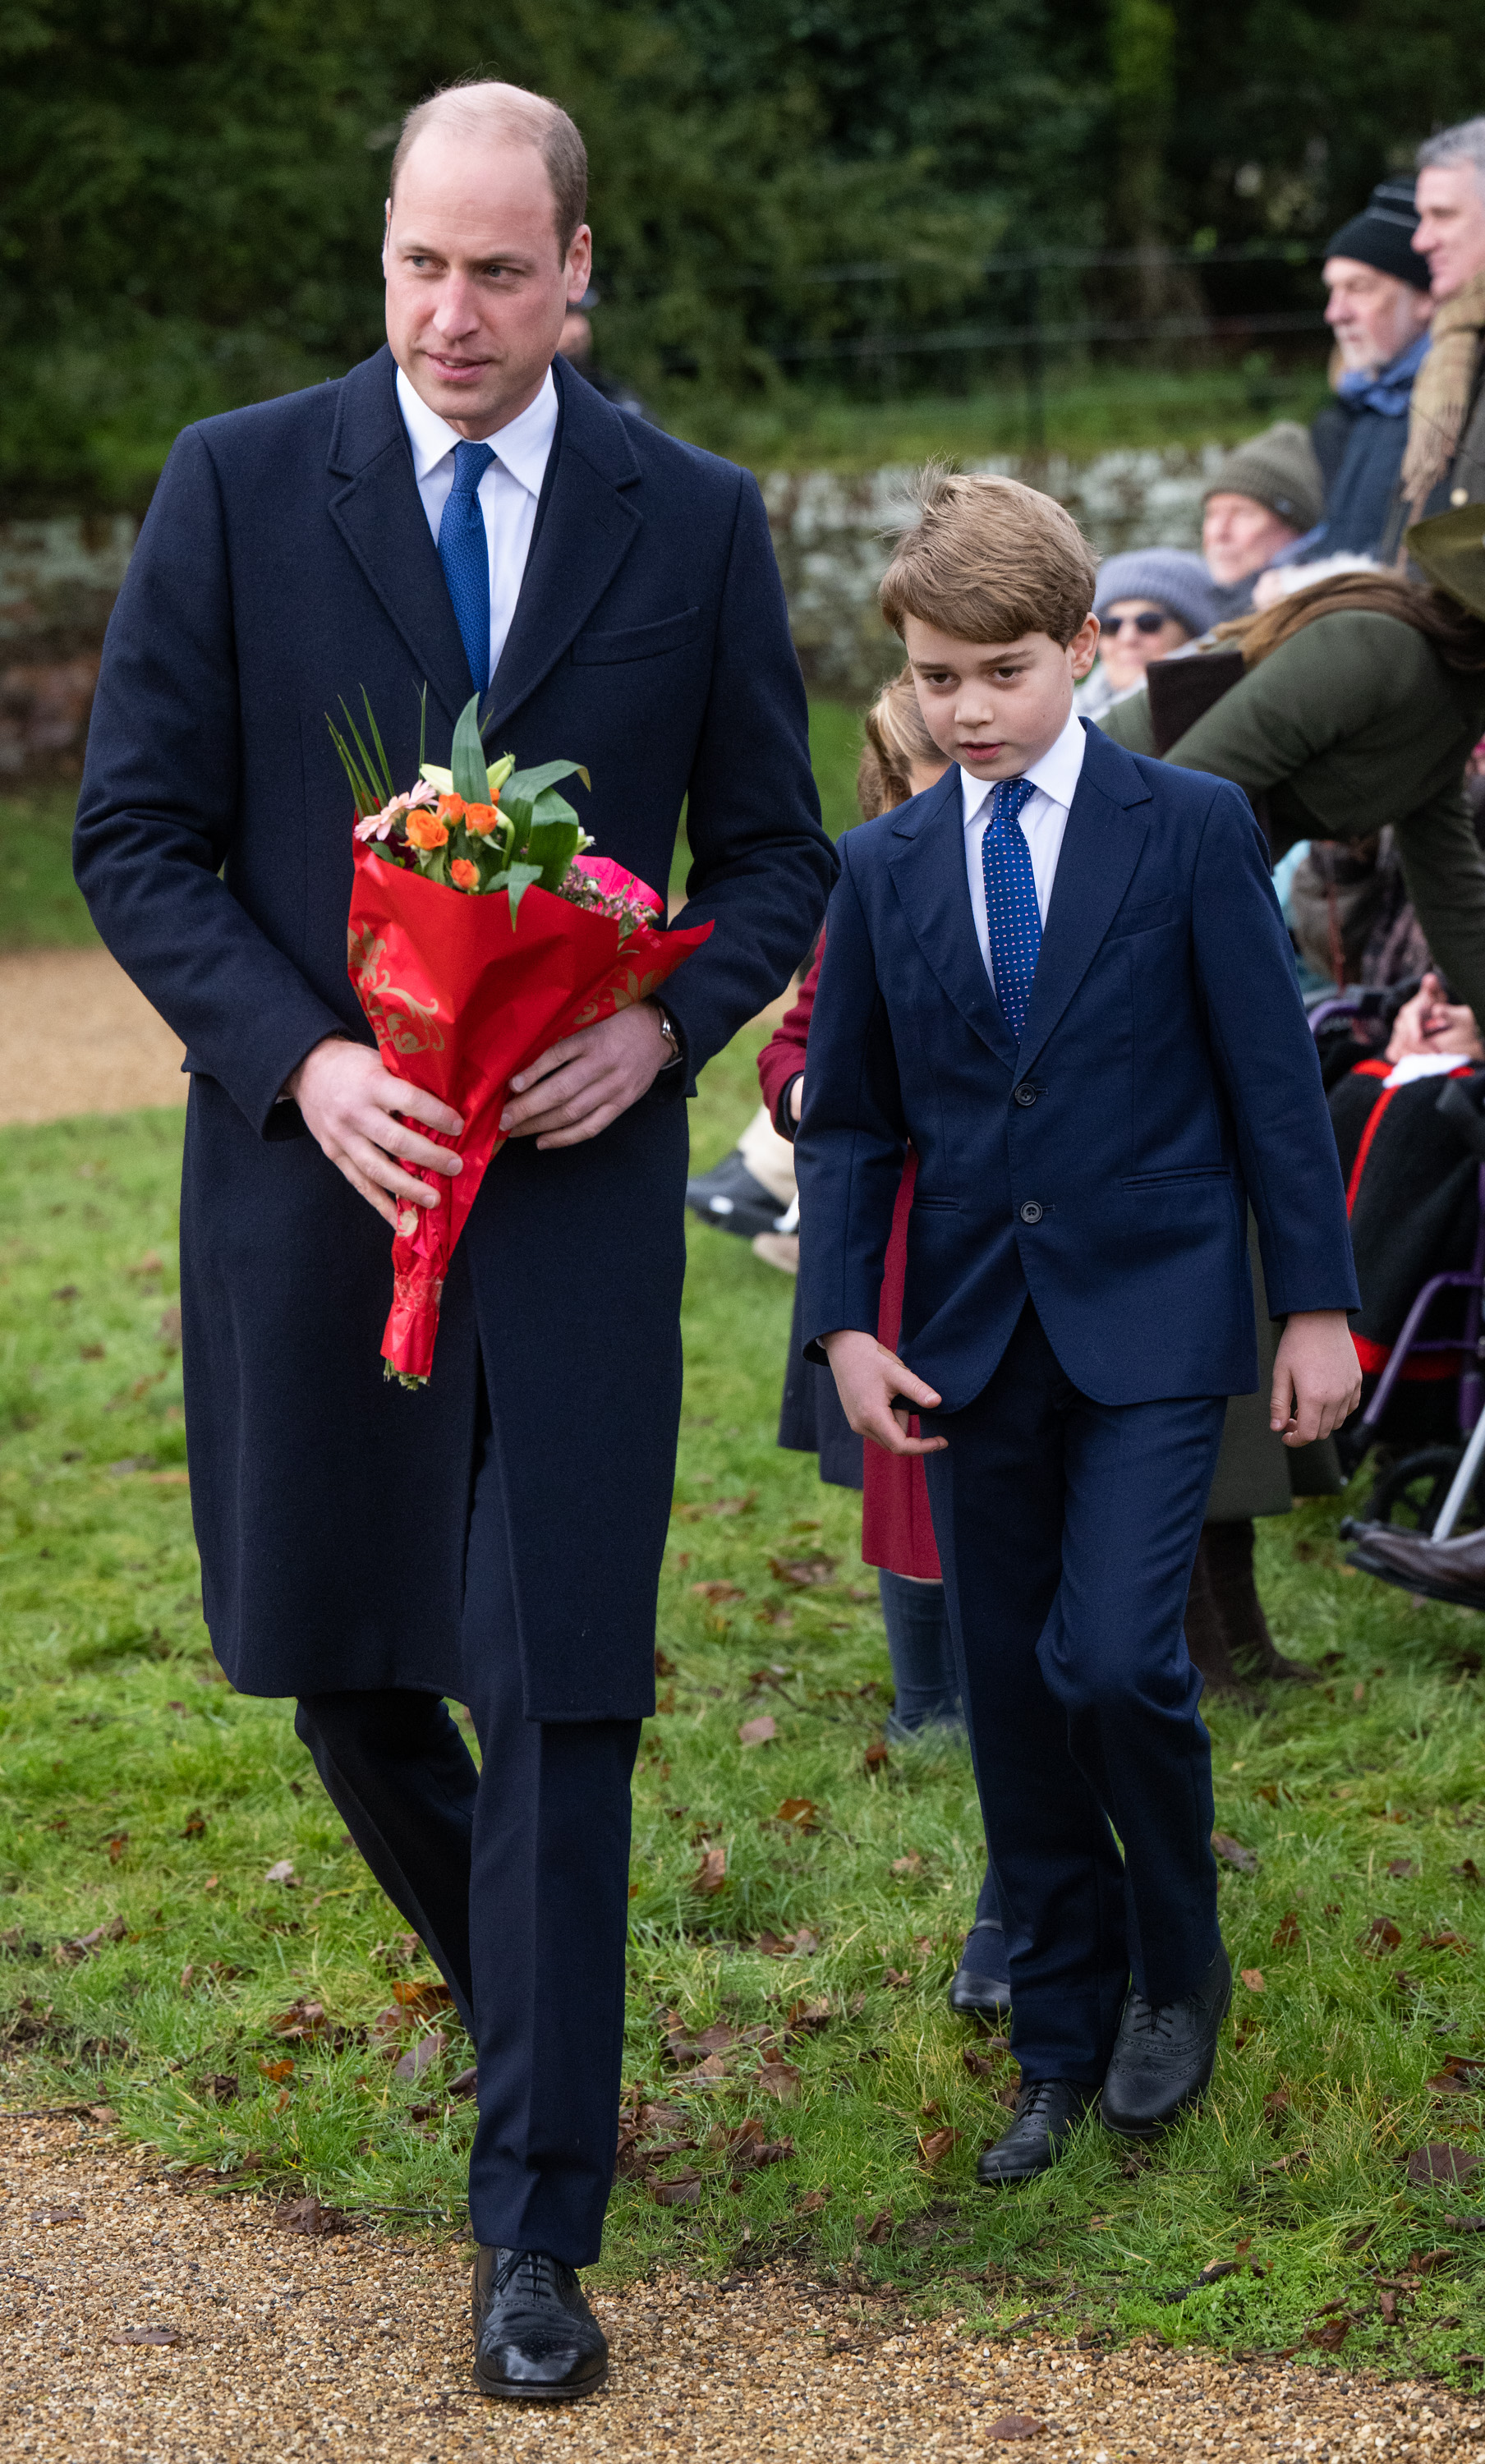 <p>Prince George trailed behind his dad, <a href="https://www.wonderwall.com/celebrity/profiles/overview/prince-william-482.article">Prince William</a>, as they arrived at the Christmas services at St. Mary Magdalene Church at King Charles III's Sandringham estate in Norfolk, England, on Dec. 25, 2022.</p><p>MORE: <a href="https://www.wonderwall.com/celebrity/royals/platinum-jubilee-see-the-best-photos-from-4-days-of-celebrations-marking-the-queens-70-year-reign-606239.gallery">All the best photos from Queen Elizabeth II's Platinum Jubilee celebrations in 2022</a></p>